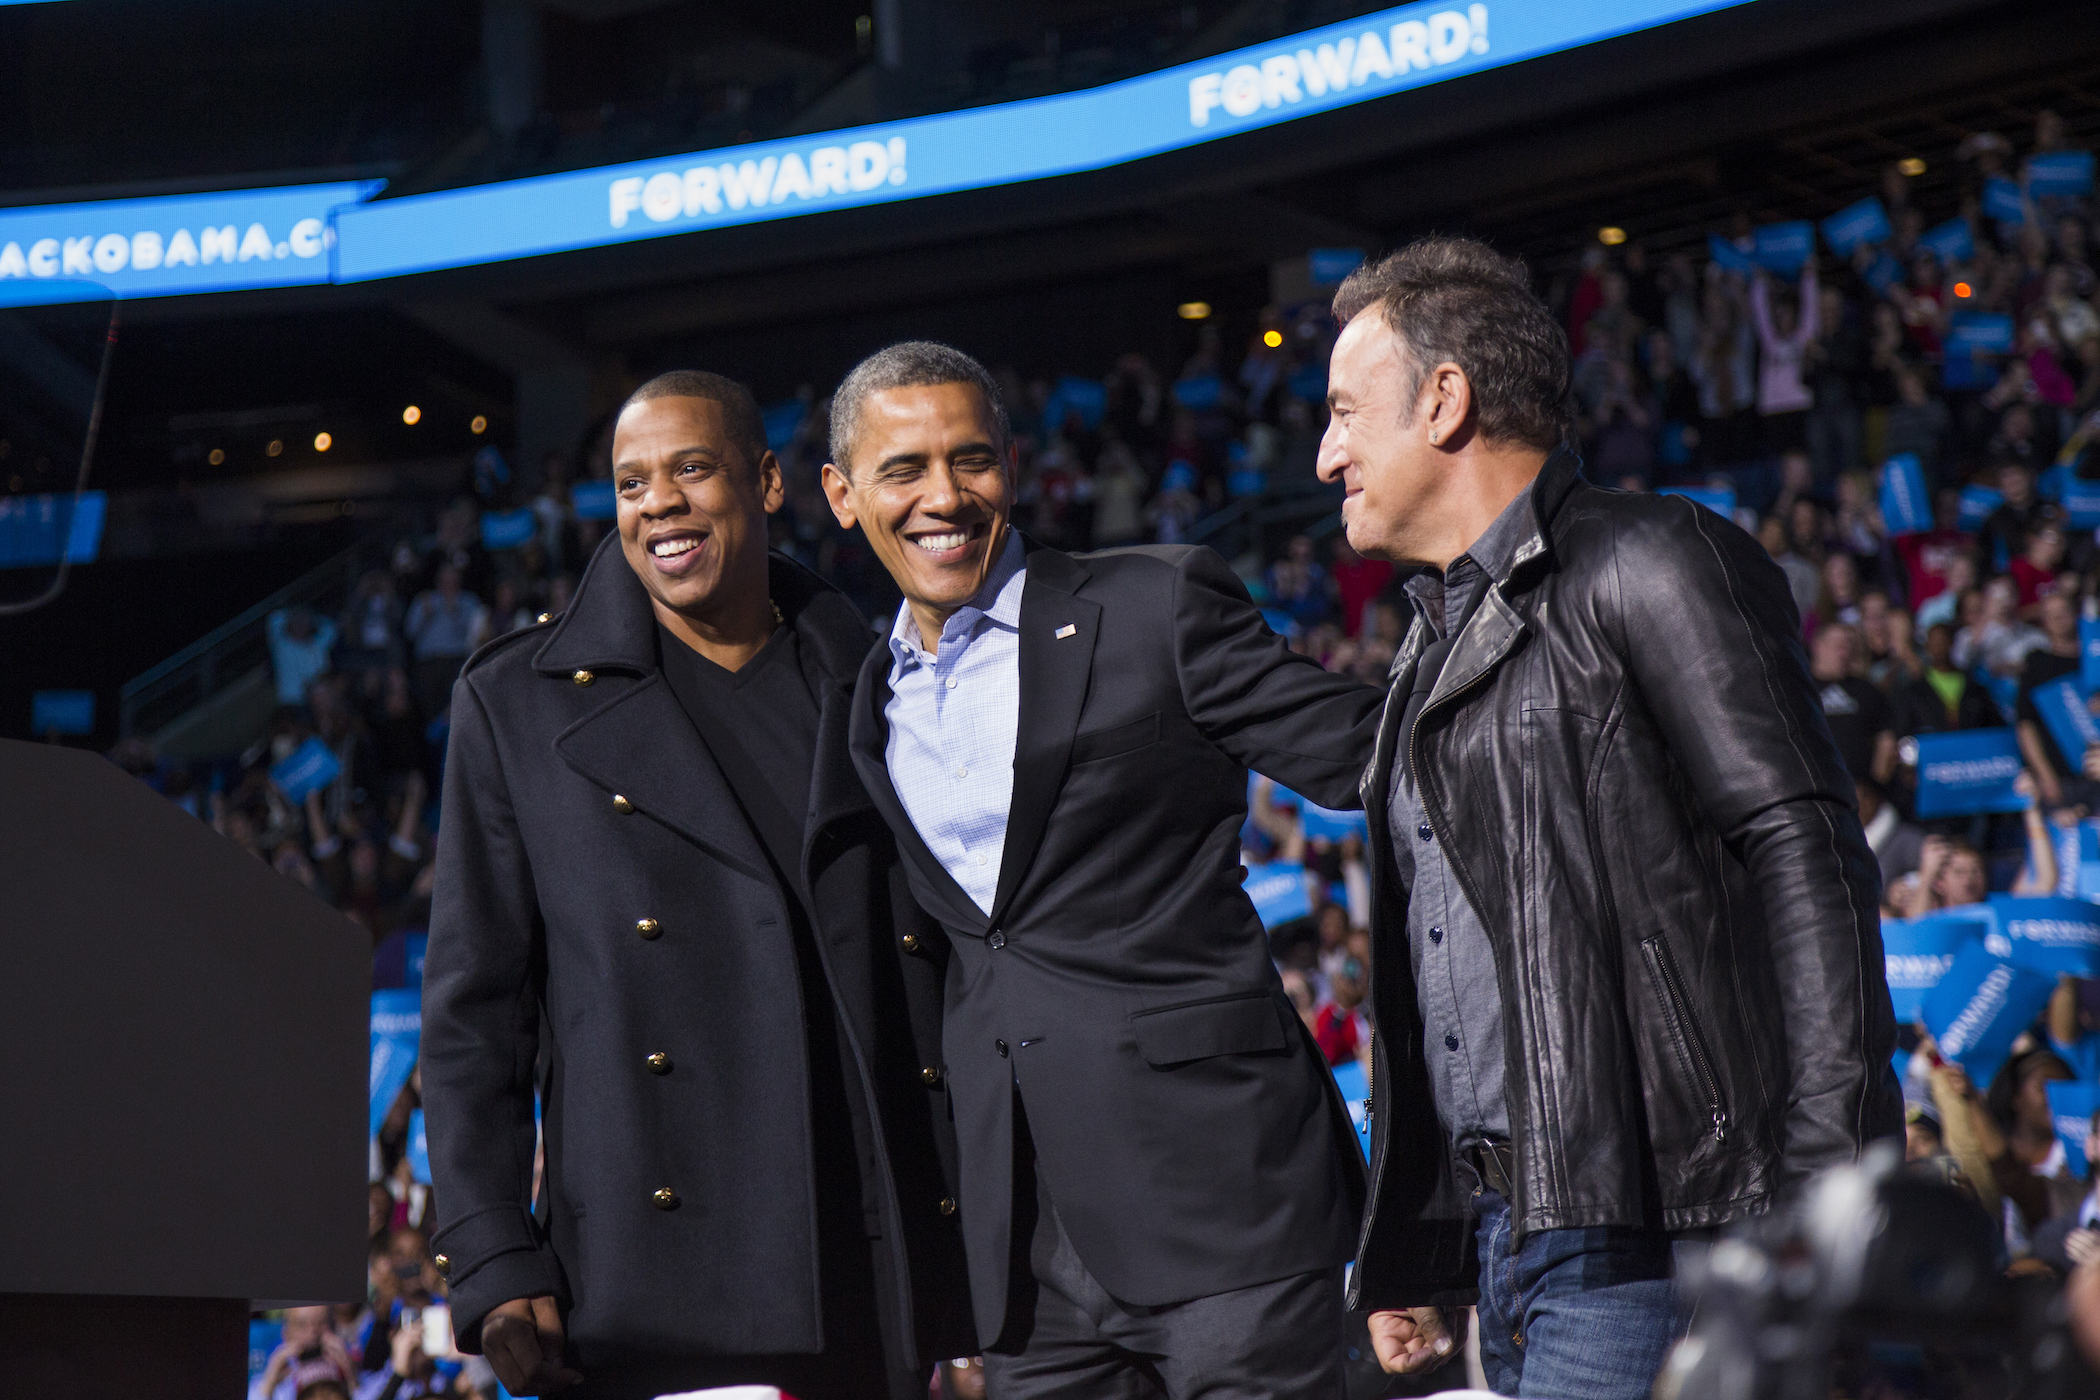 U.S. President Barack Obama stands on stage with rapper Jay-Z and musician Bruce Springsteen at an election campaign rally